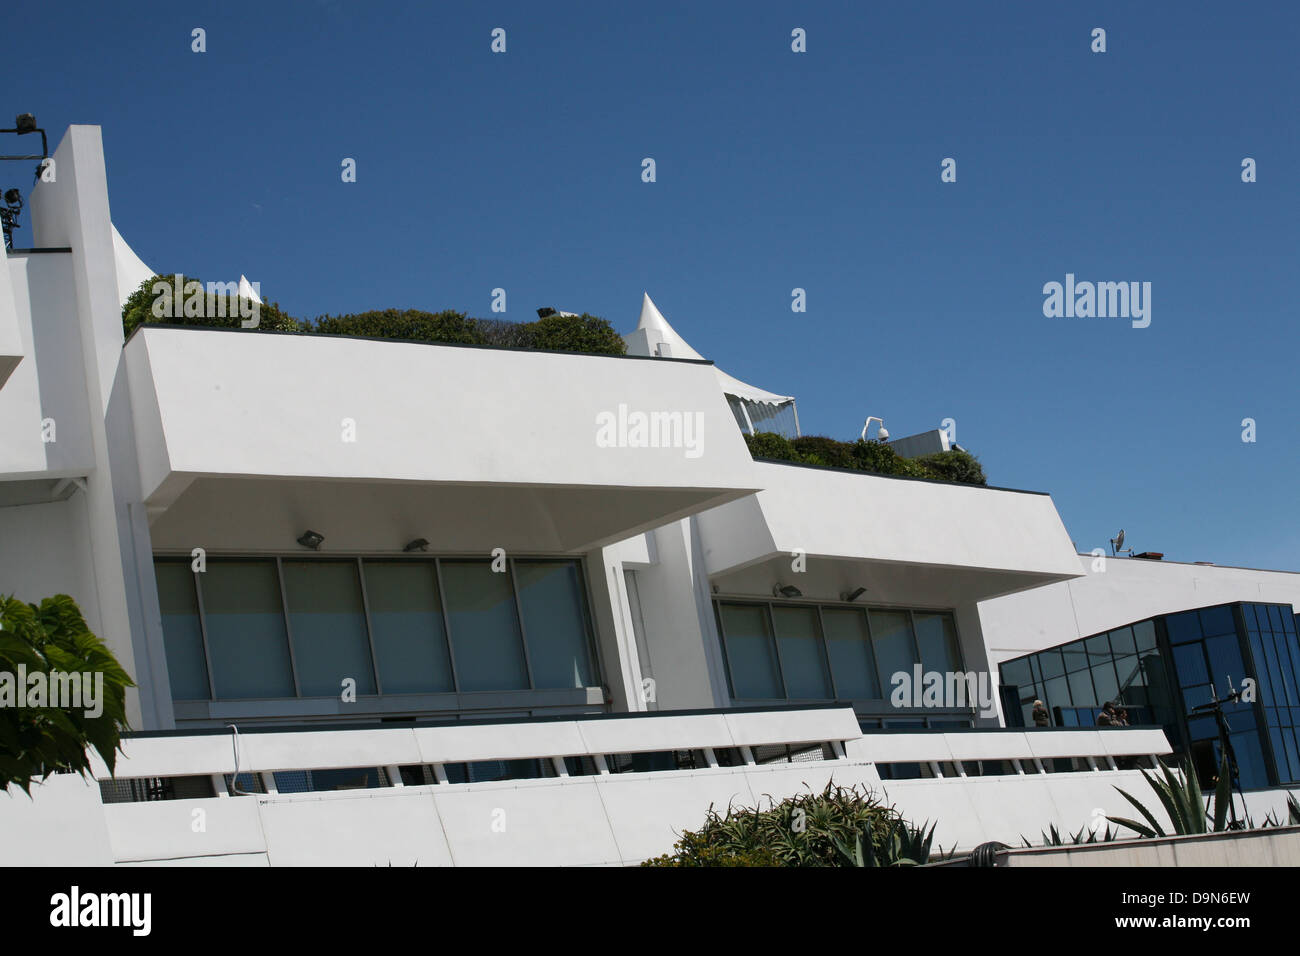 The rooftop of Palais des festivals during the Cannes Film Festival 2013 Stock Photo